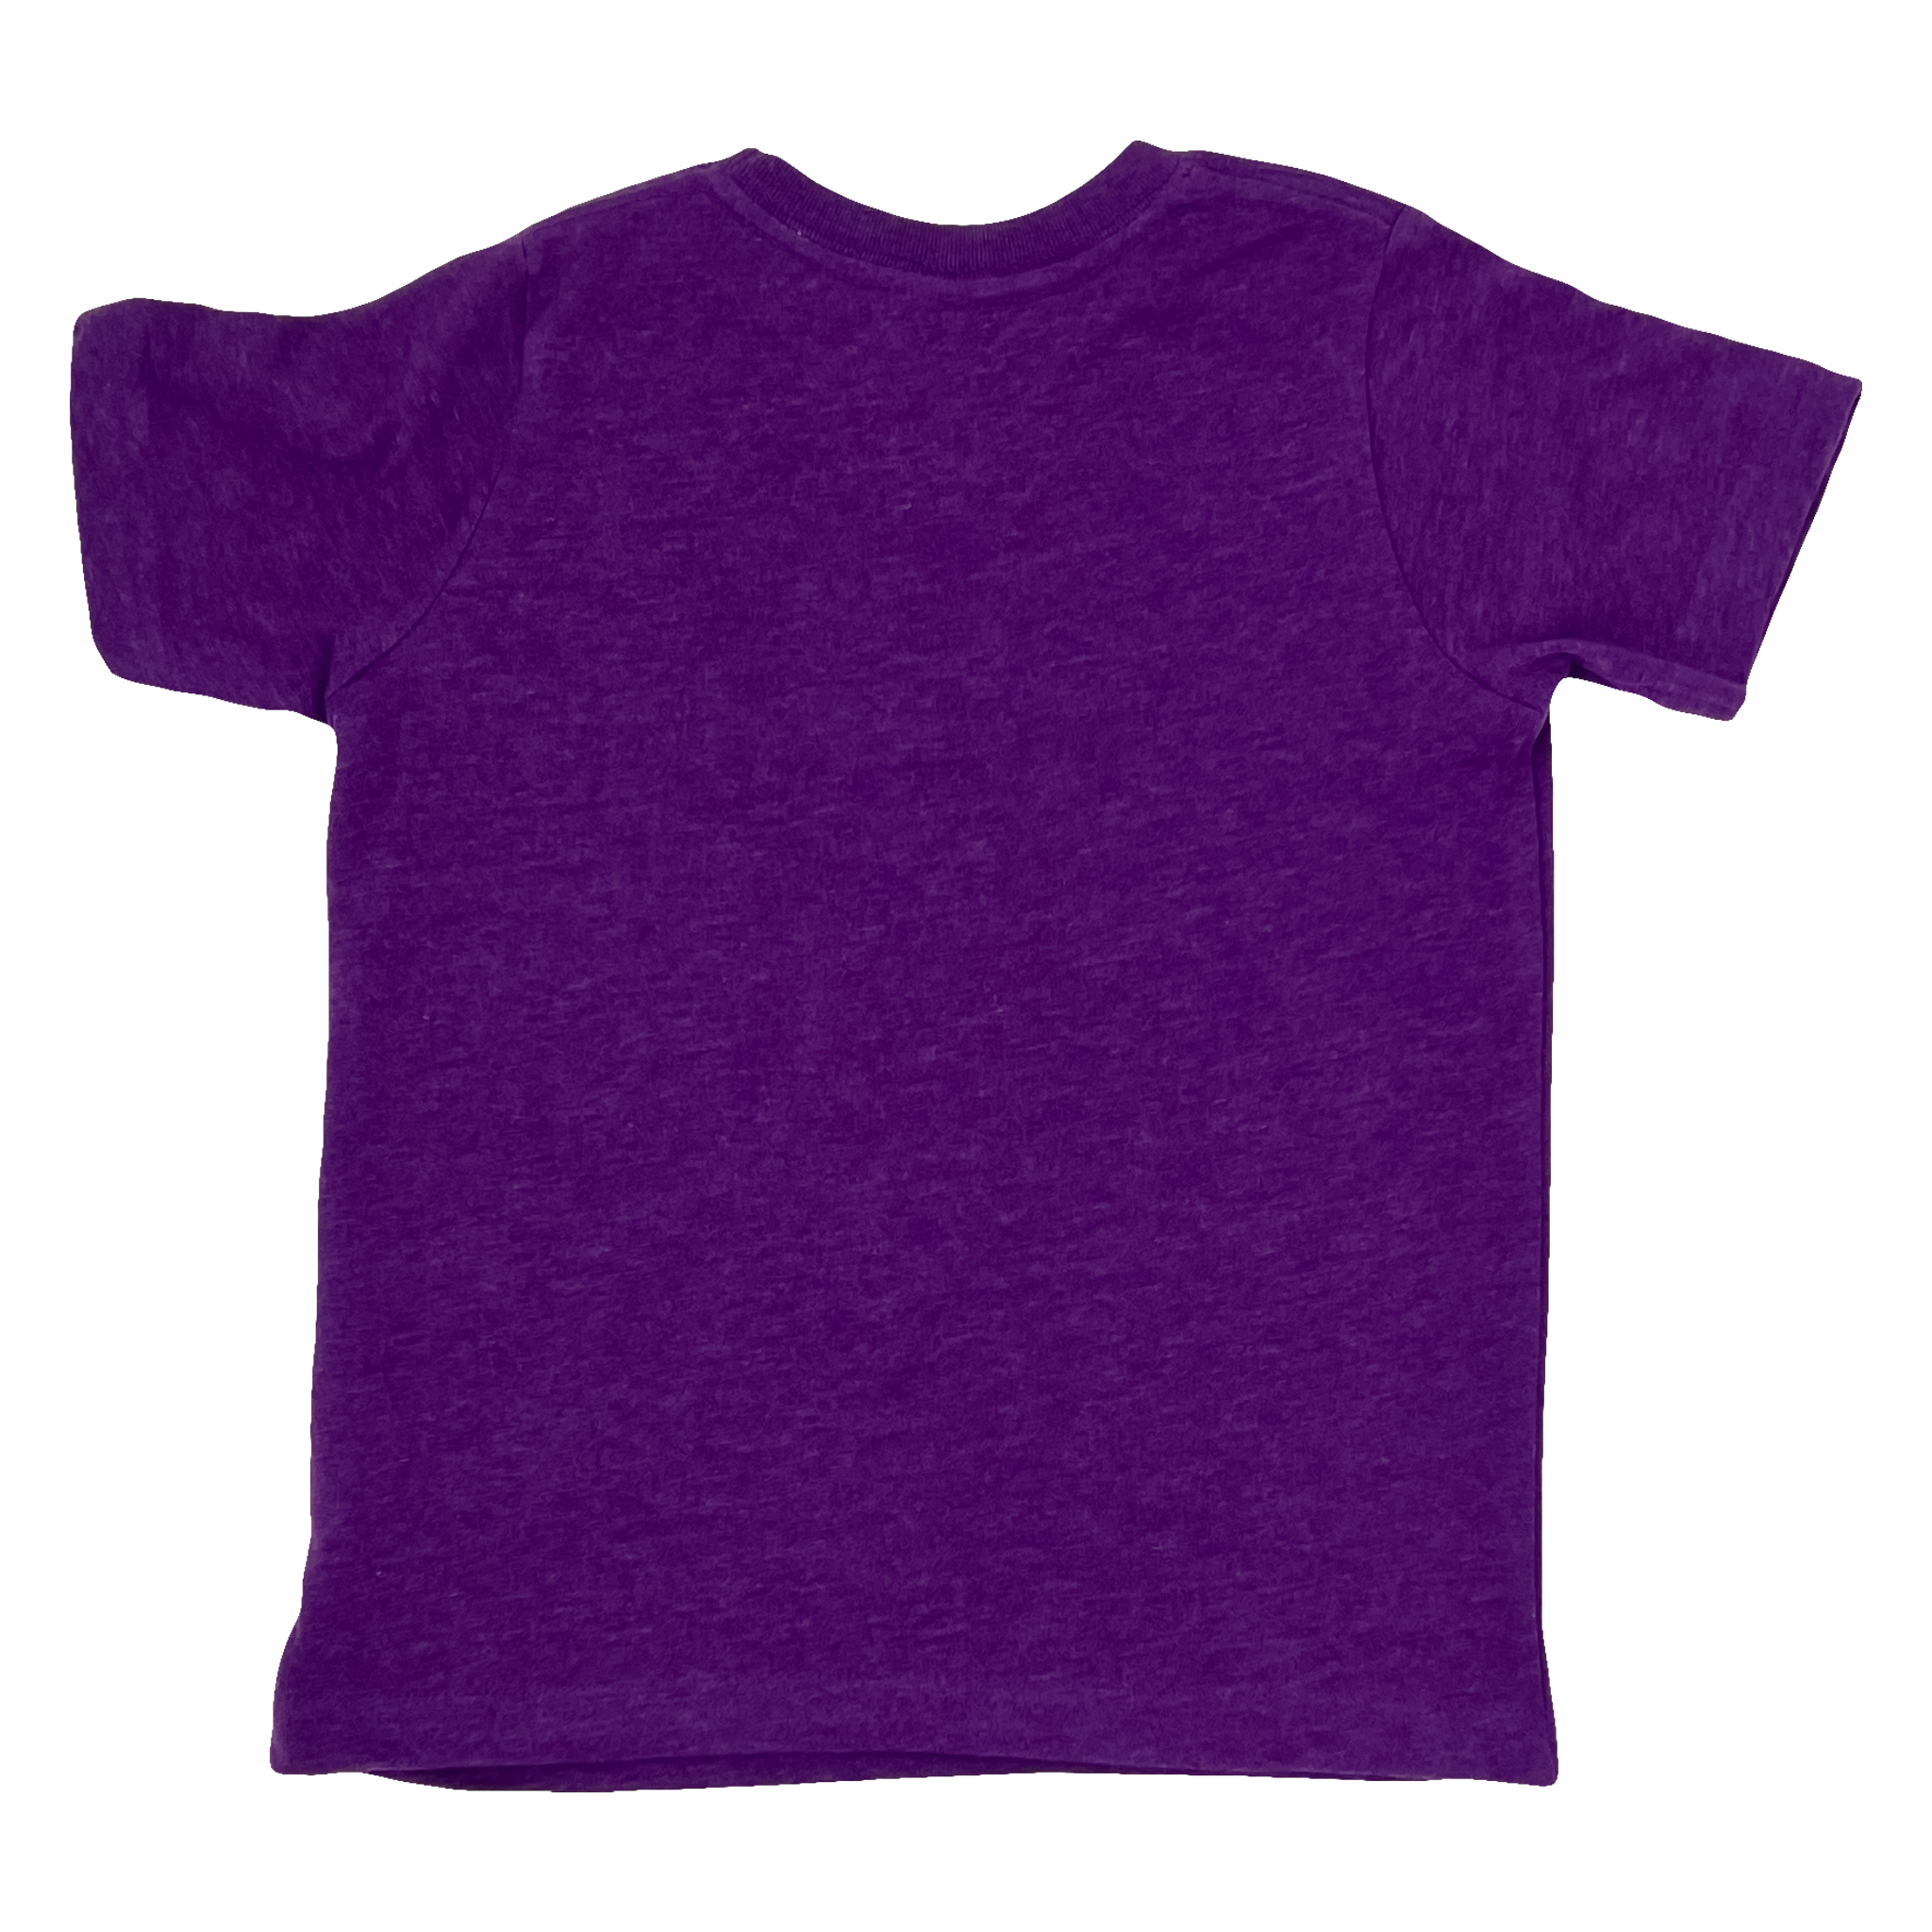 Back of the vintage heather  purple toddler shirt.